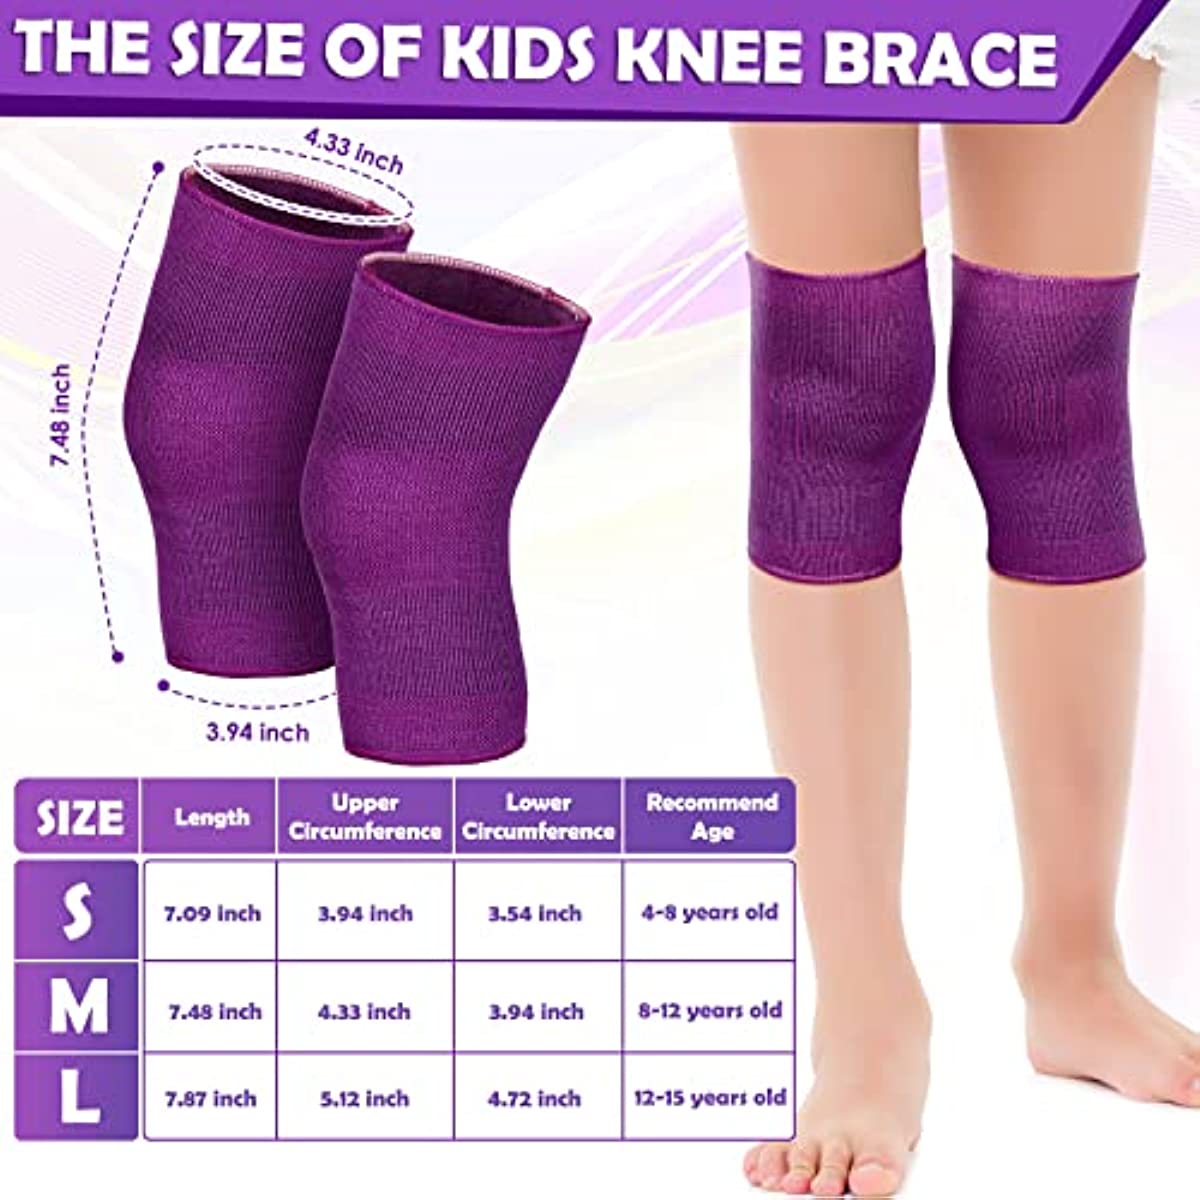 3 Pairs Kids Knee Brace Children Patella Pad Support Breathable Flexible Elastic Knee Protector Compression Knee Sleeves for Girls Boys Volleyball Basketball Dance Skating (Medium)